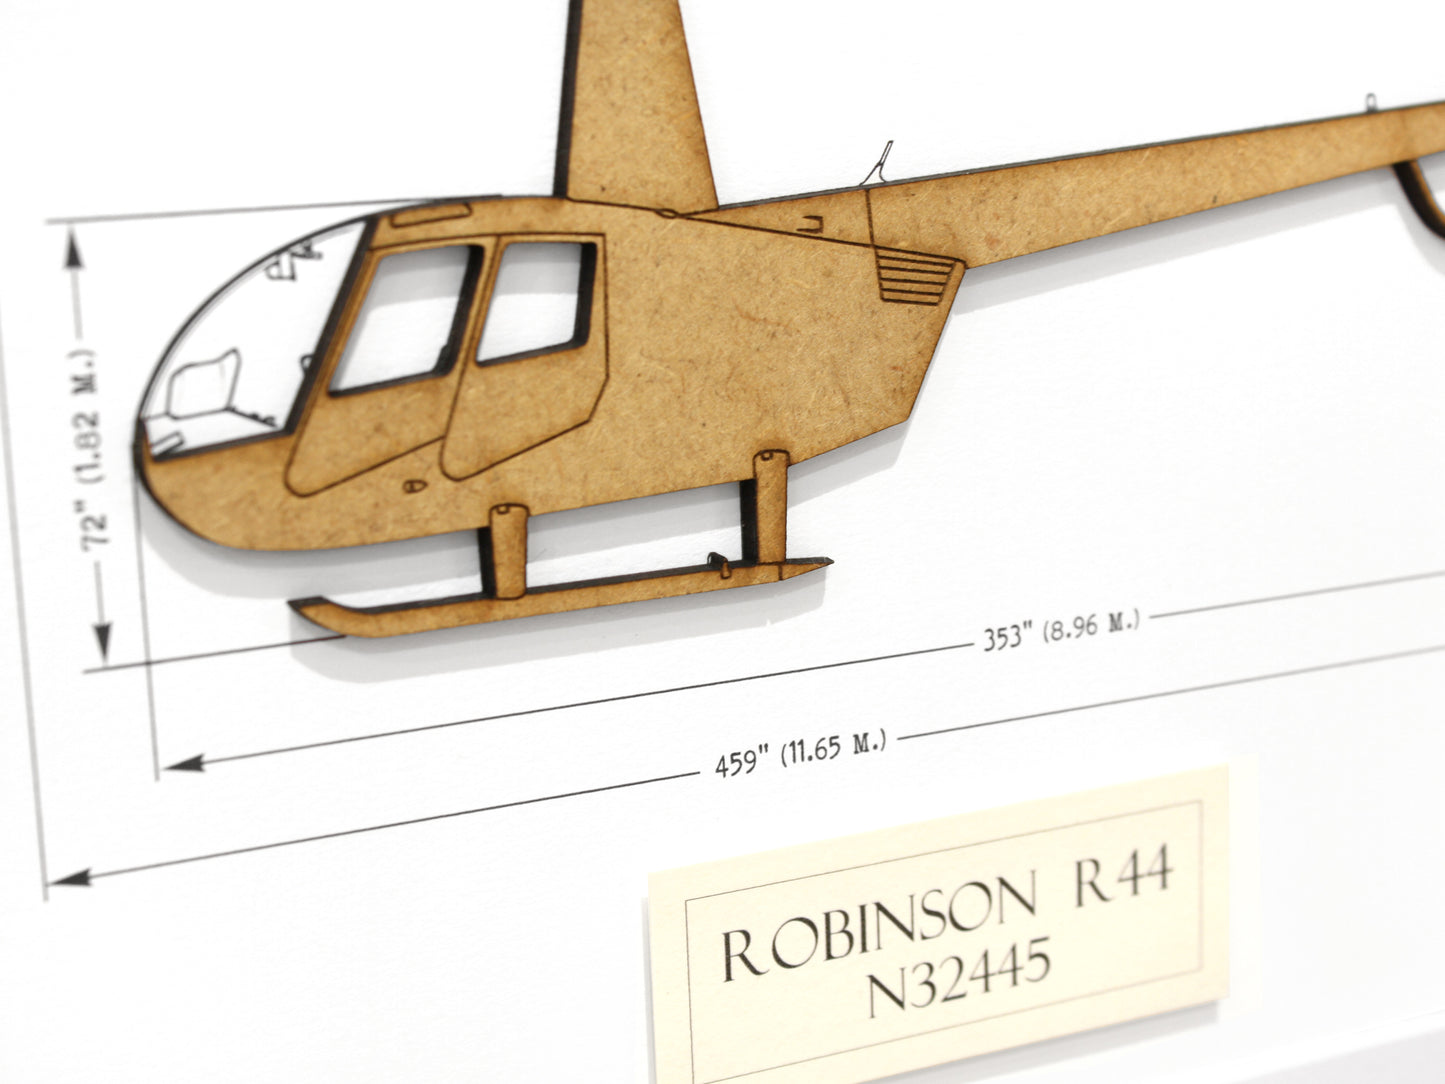 Robinson R44 helicopter gift